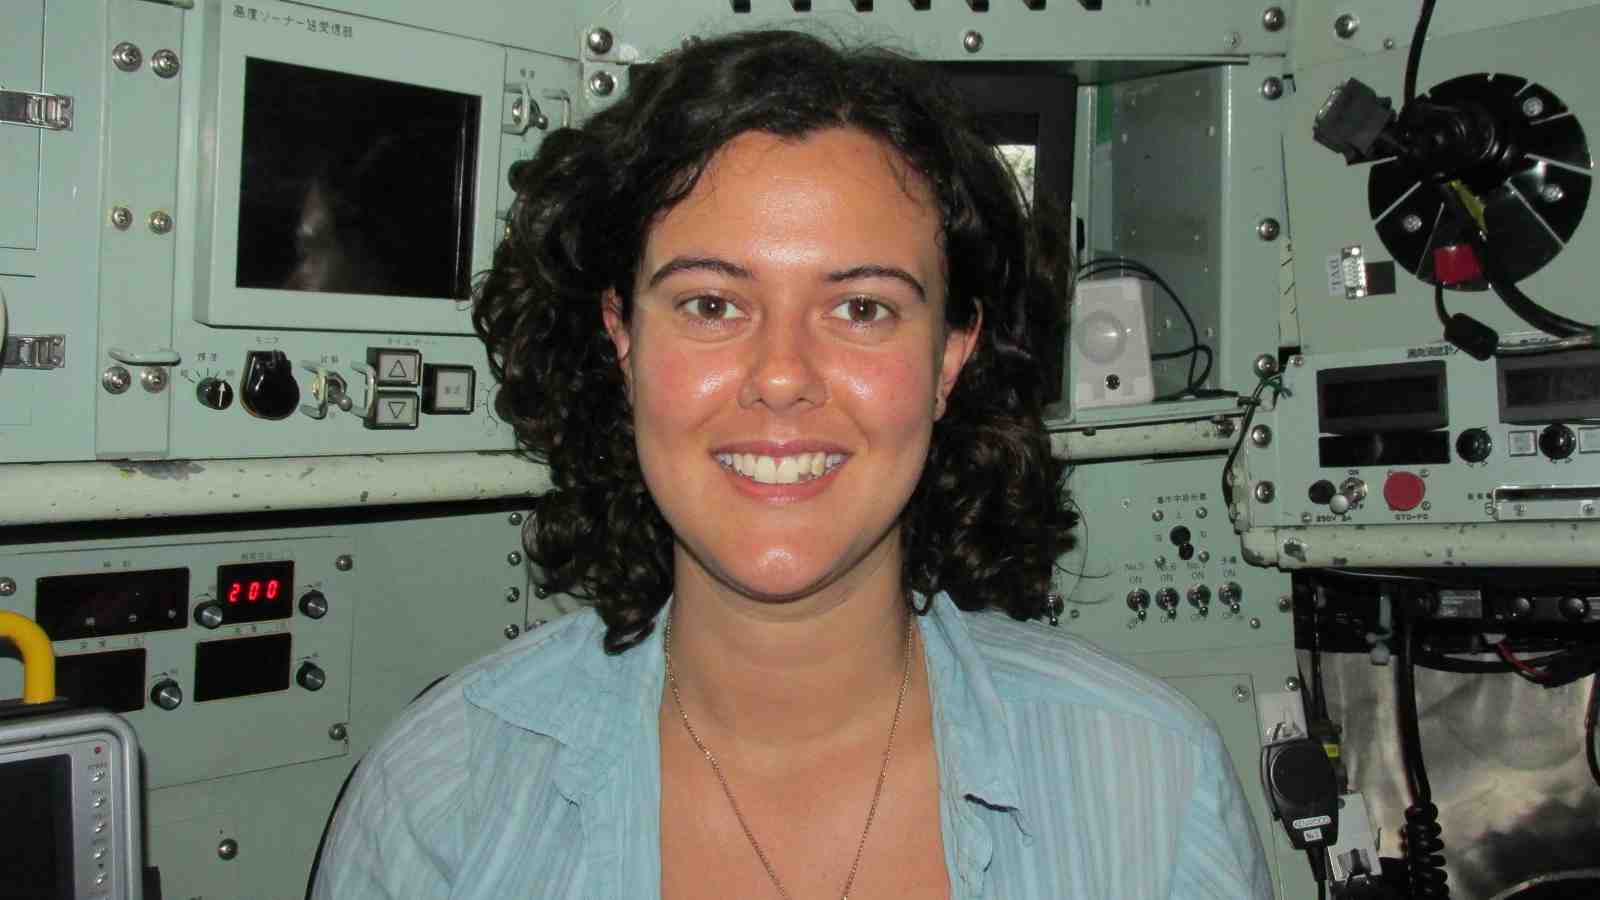 Rachel Boschen's PhD research finds New Zealand's seafloor is at risk of deep-sea mining – she is touring a deep-sea submersible during a research voyage along the Kermadec Volcanic Arc.